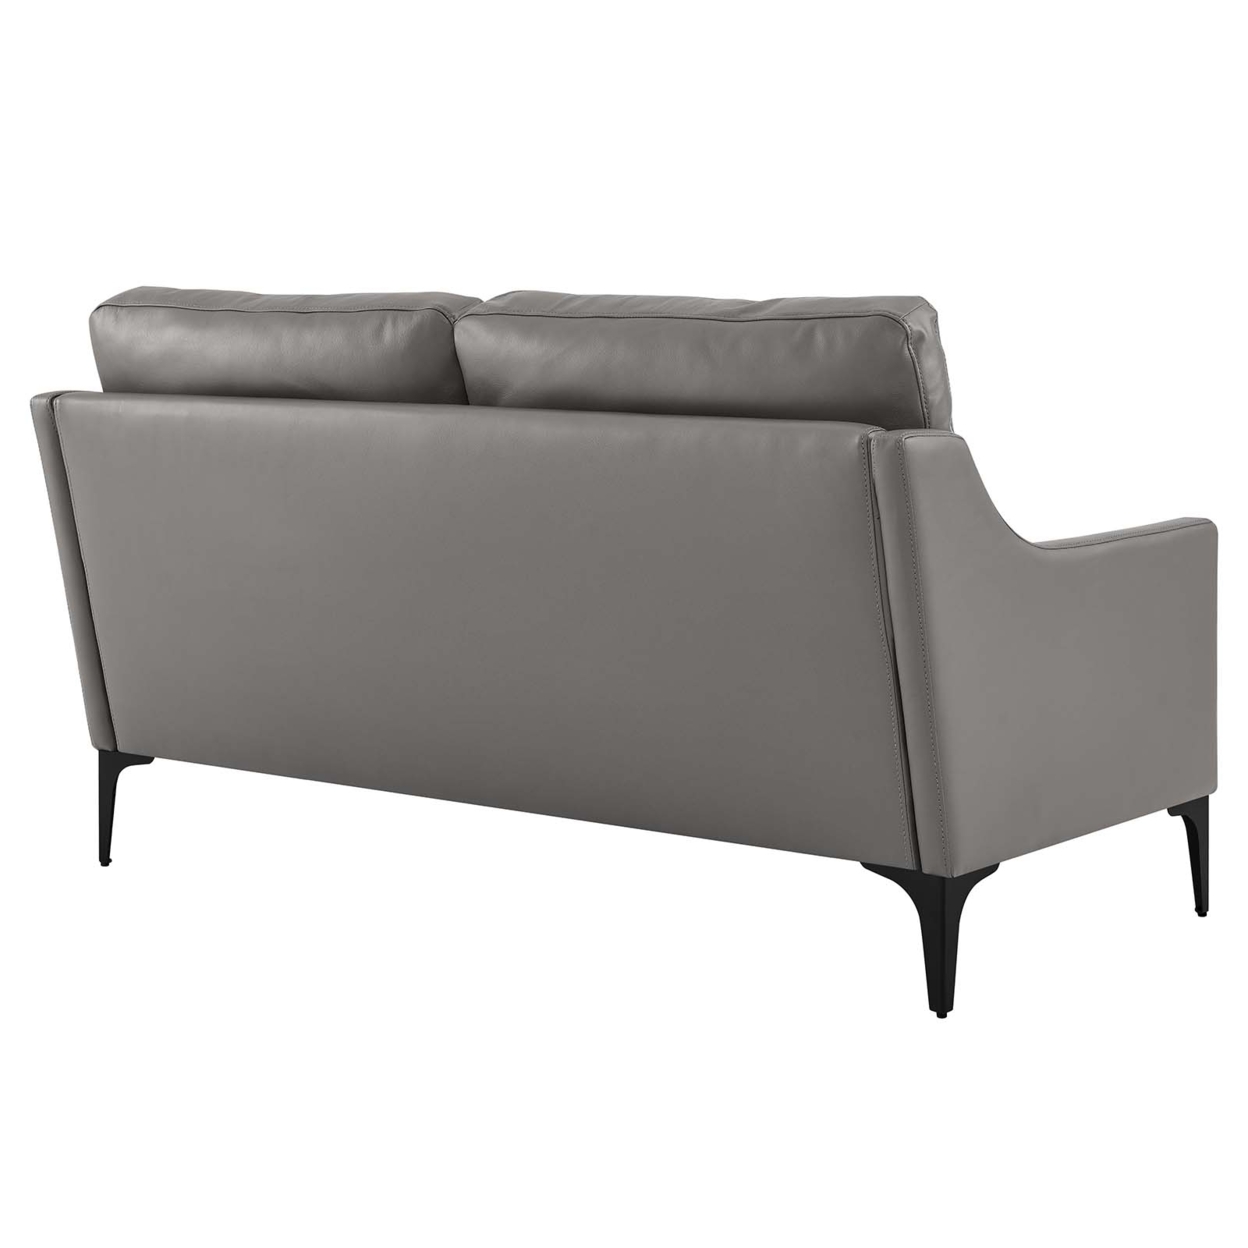 Corland Leather Loveseat, Gray